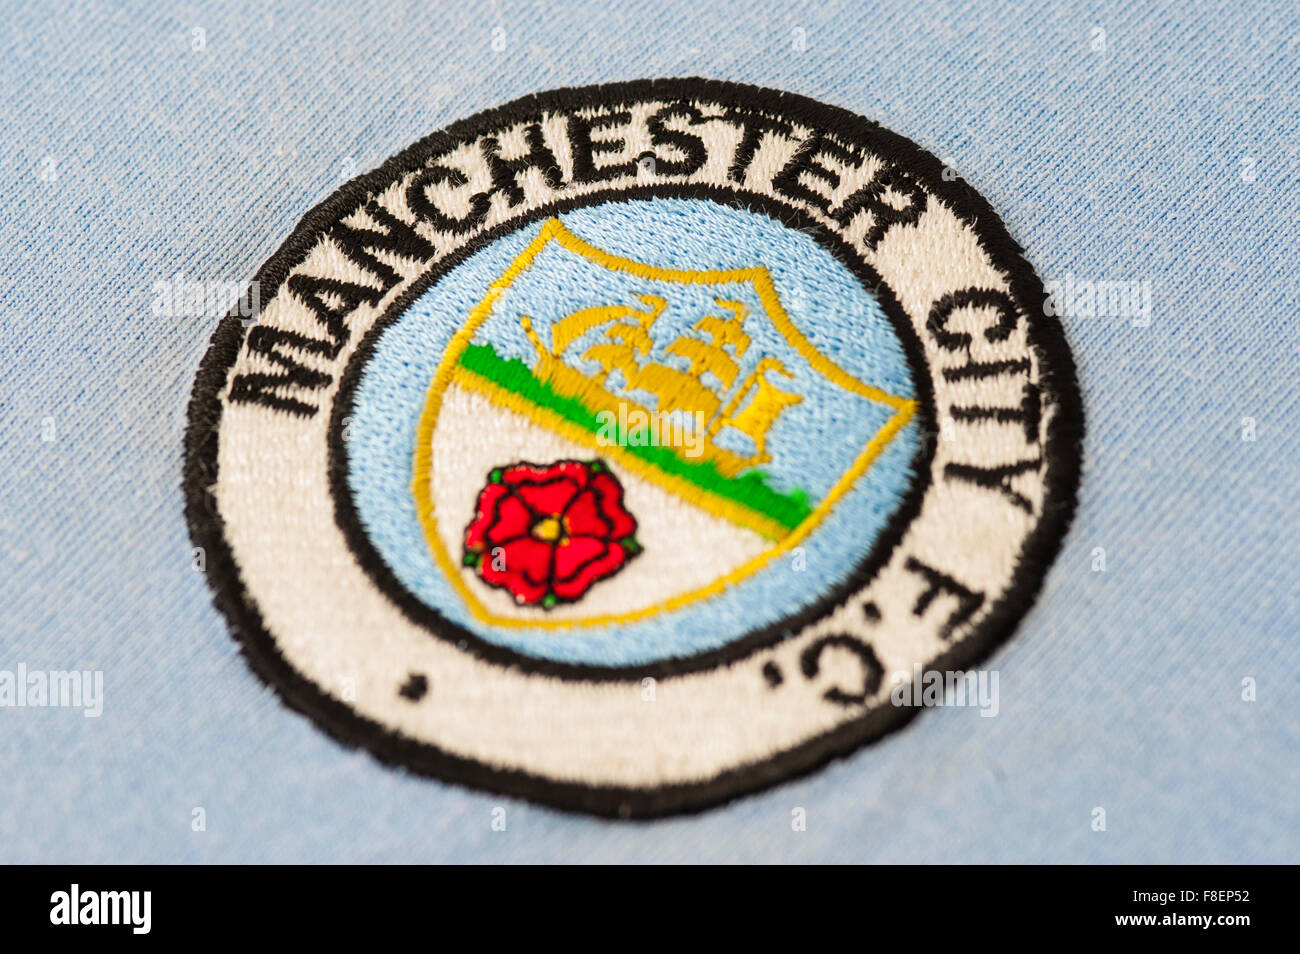 Close up of Manchester City Football Club Crest Stock Photo